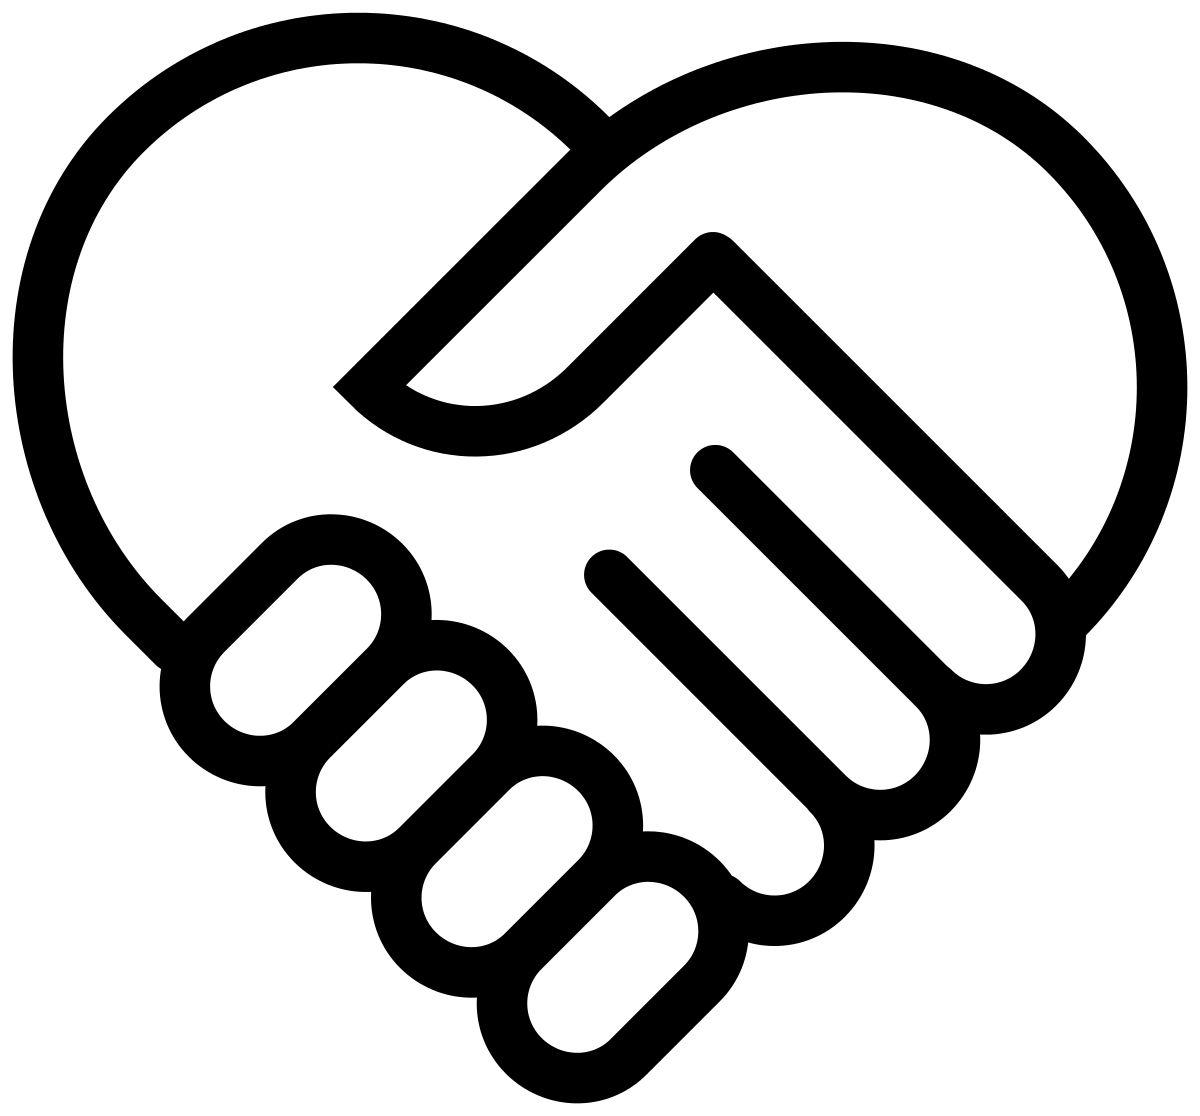 Download File:Heart-hand-shake.svg - Wikimedia Commons